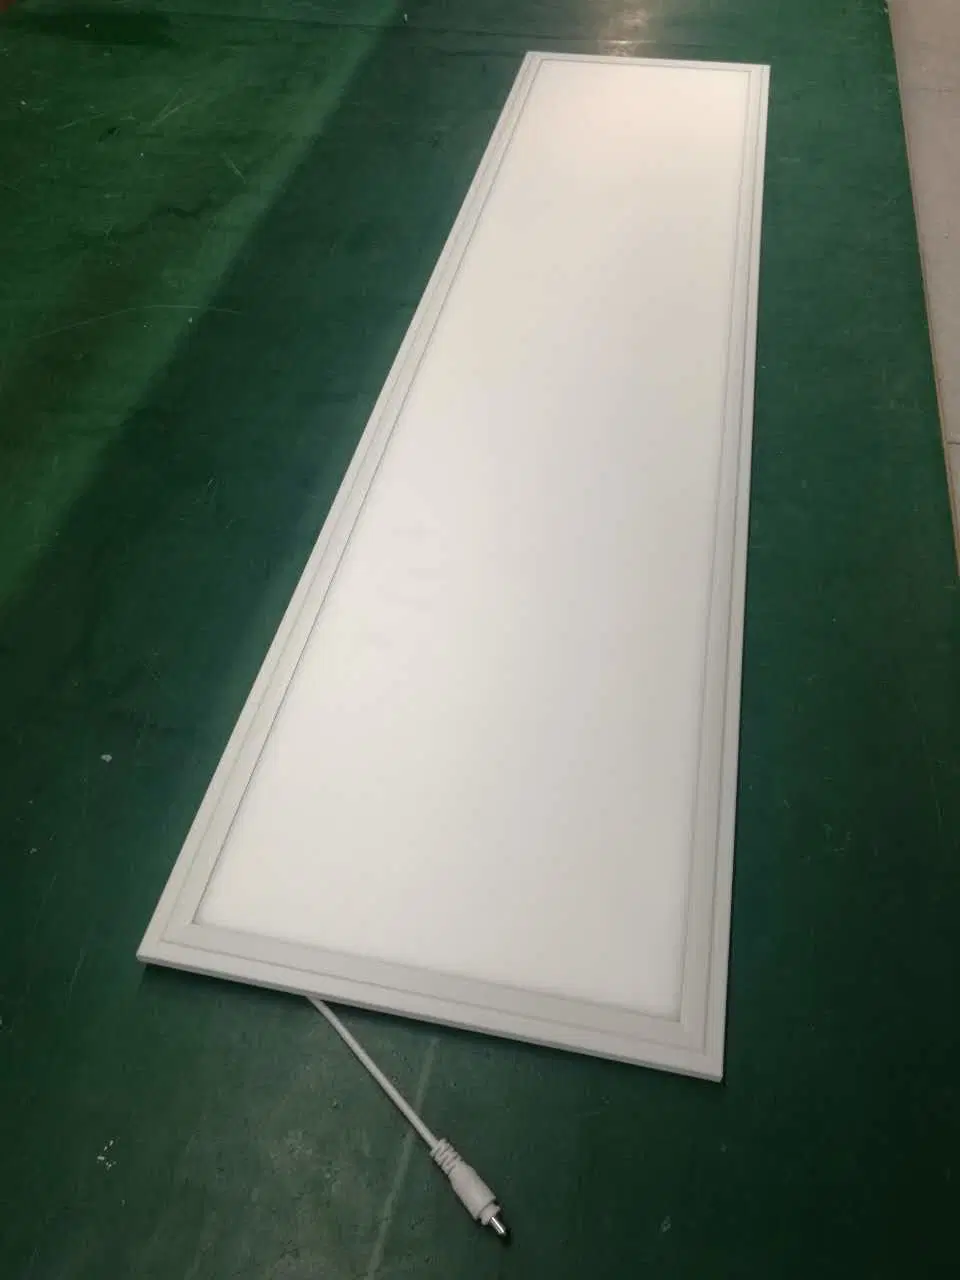 CCT Tunable White and Brightness Dimmable LED Panel Light 1200X300